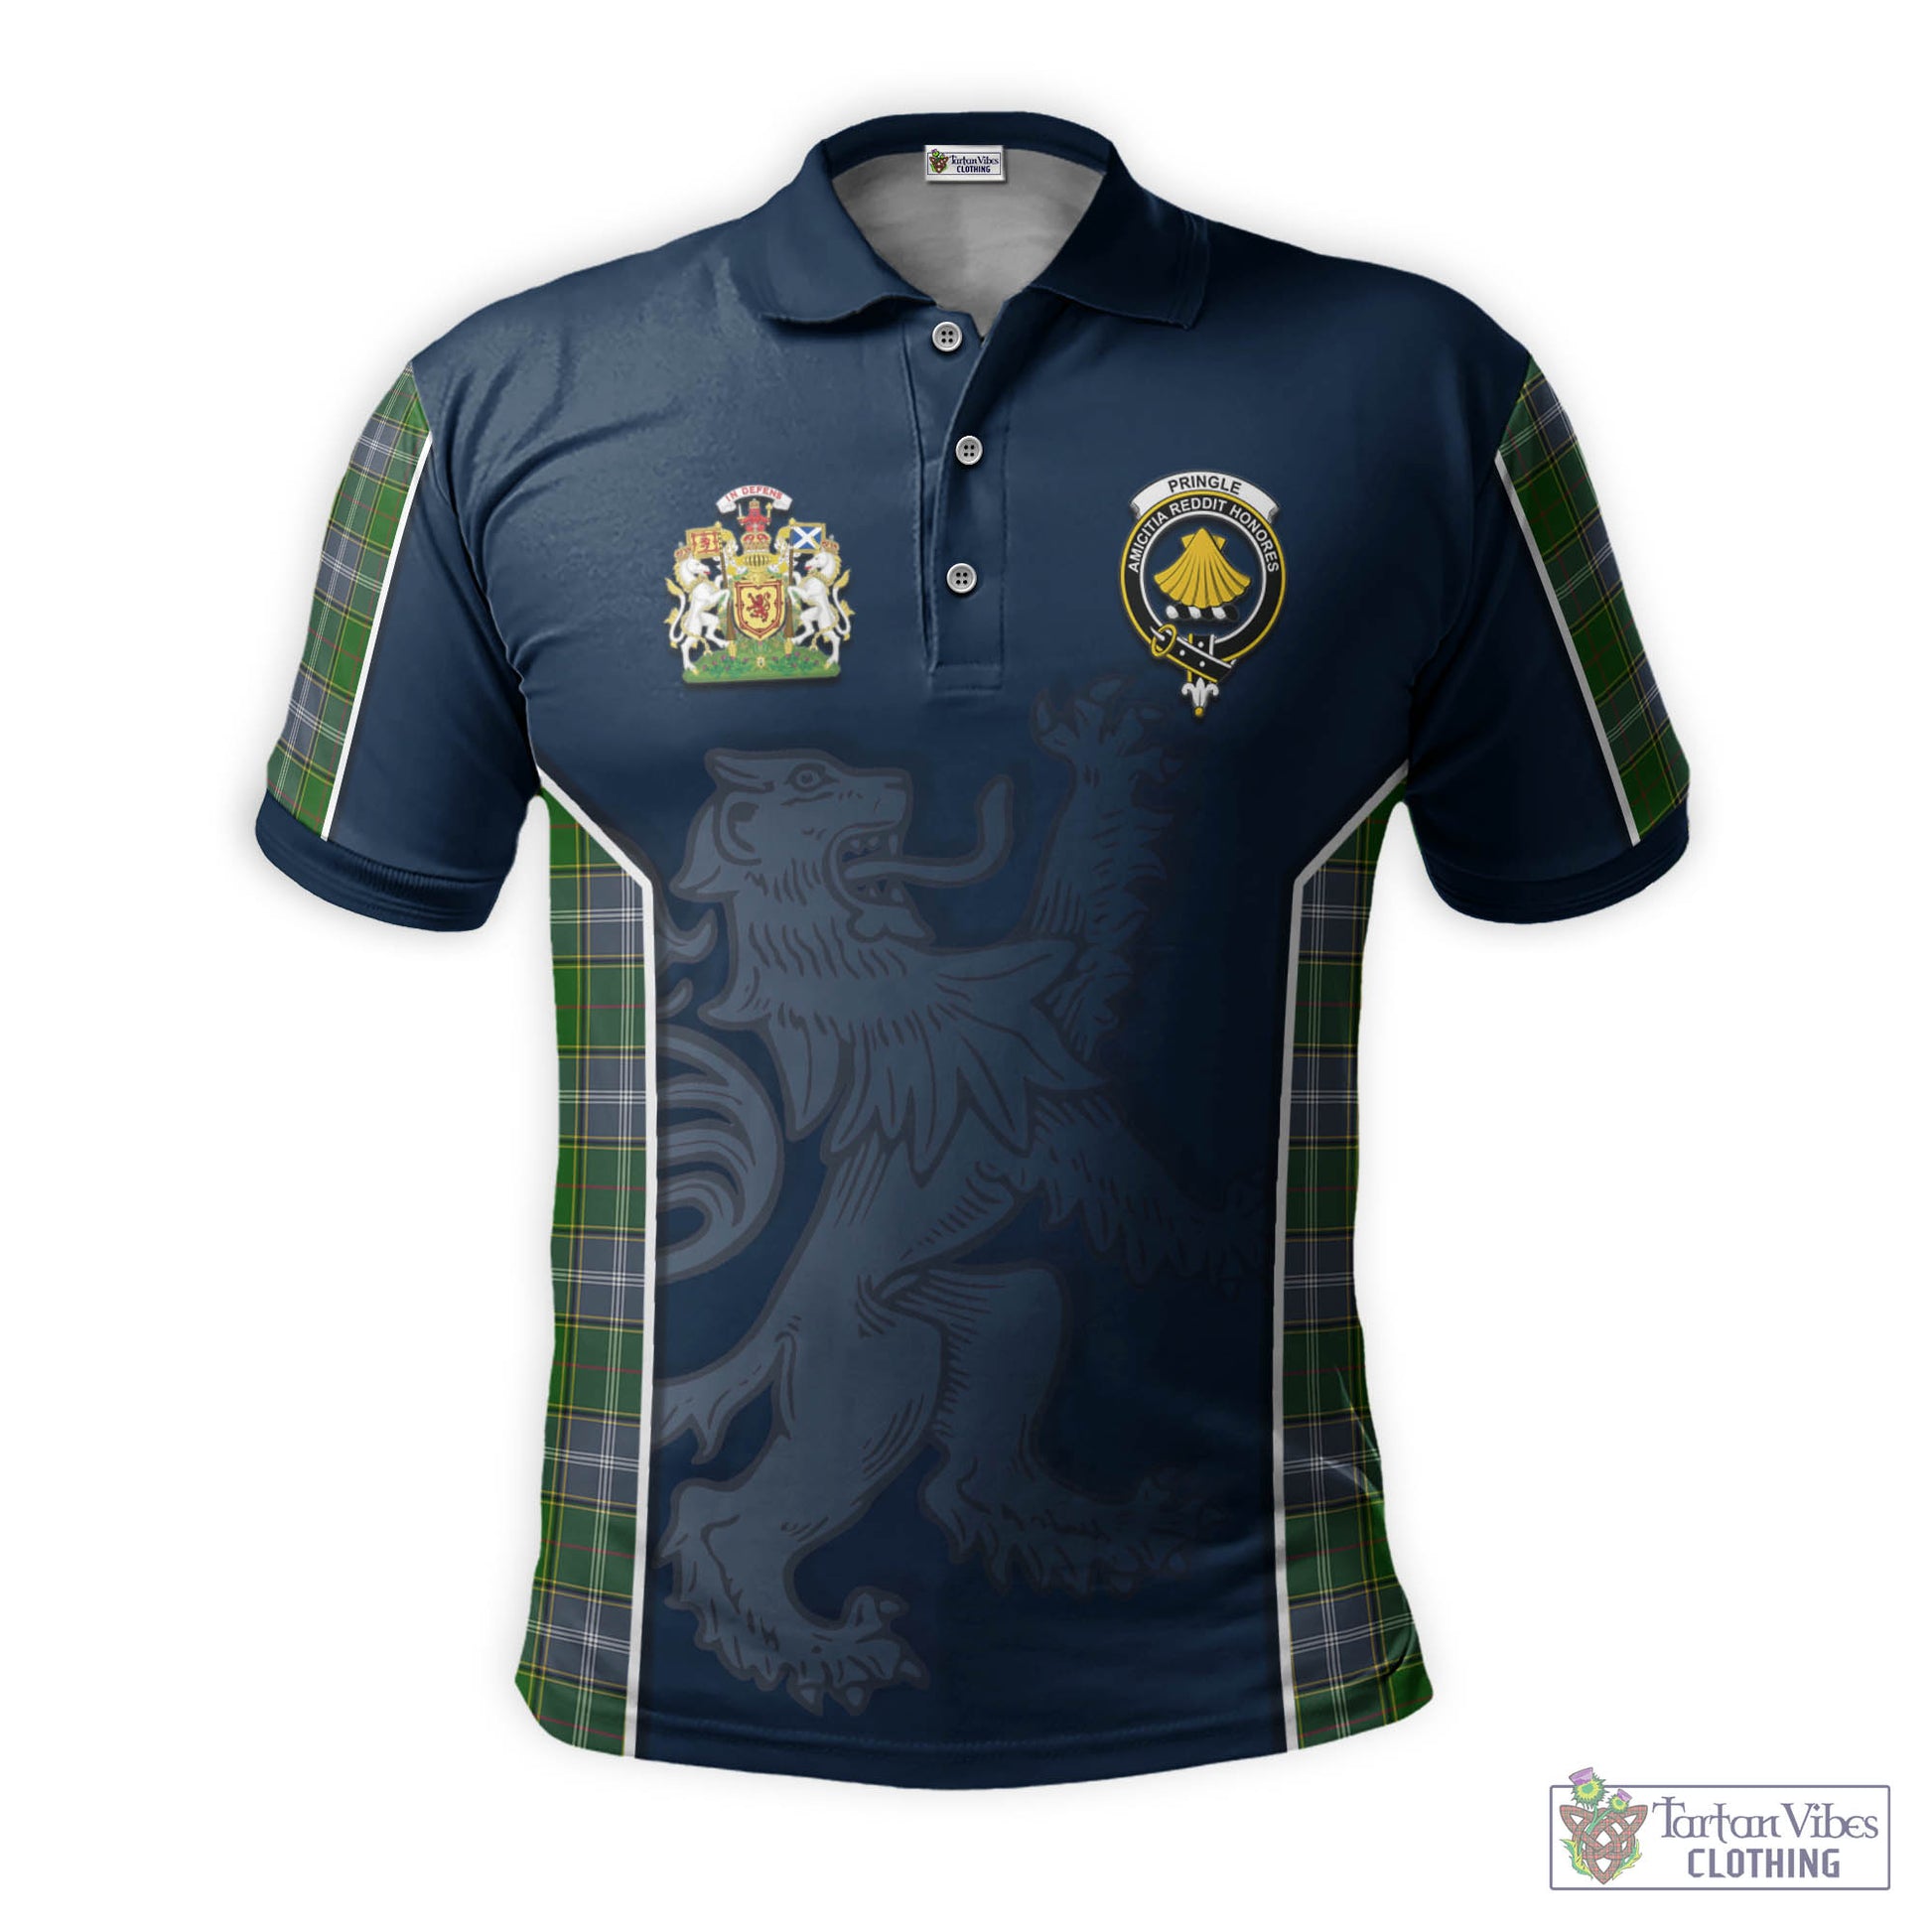 Tartan Vibes Clothing Pringle Tartan Men's Polo Shirt with Family Crest and Lion Rampant Vibes Sport Style